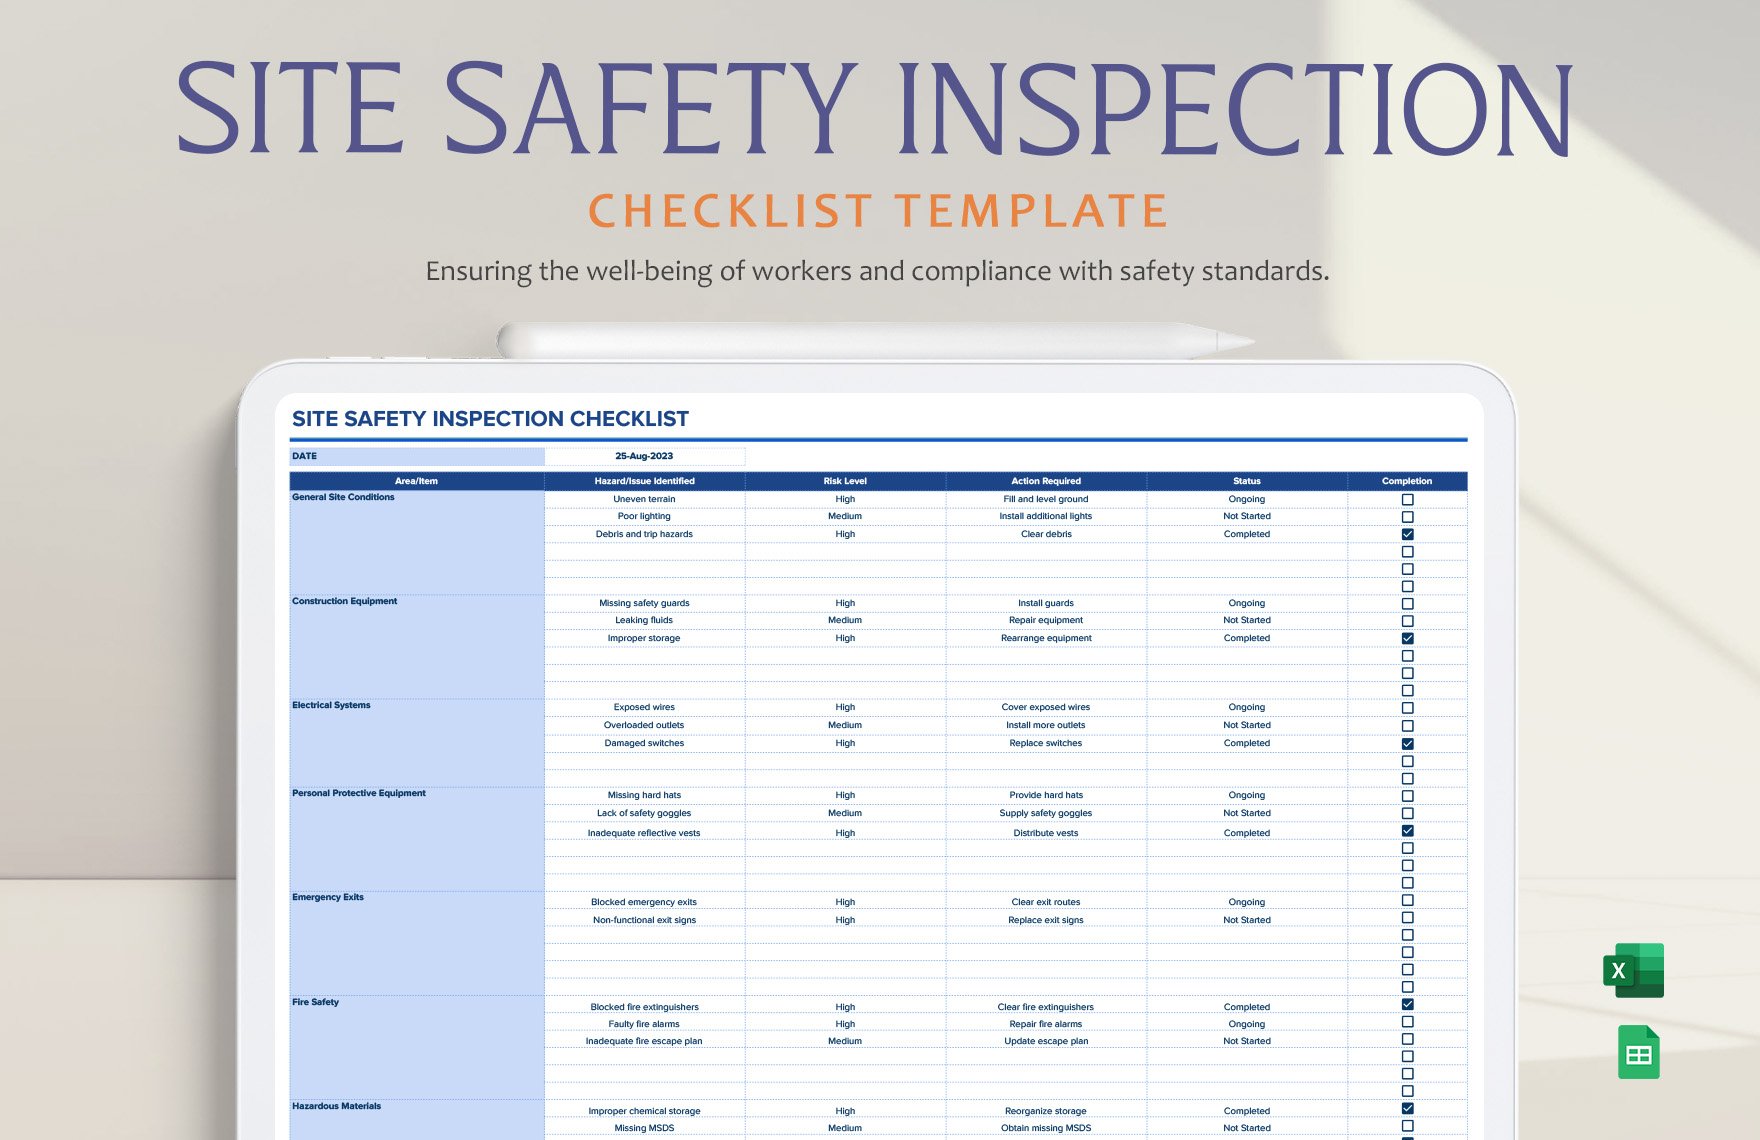 Site Safety Inspection Checklist Template